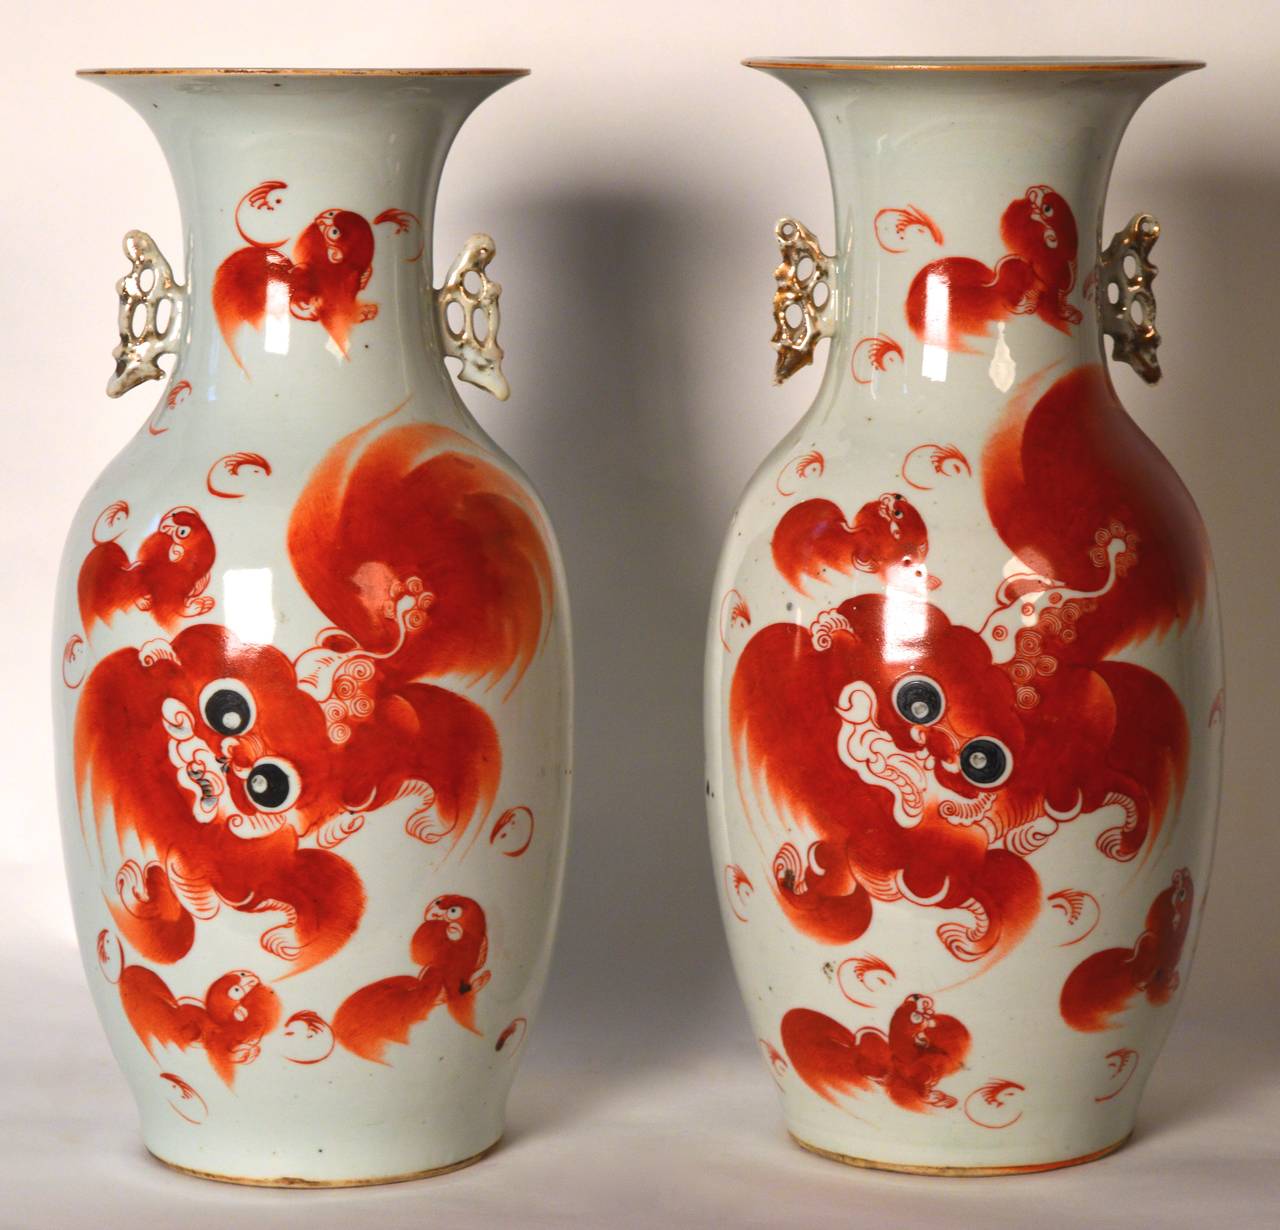 Two Chinese baluster form porcelain vases . White with iron red Shishi foo dog decoration on front , black good luck characters on reverse and gilt side handles.
Chinese Qing dynasty (end of the 19th century)